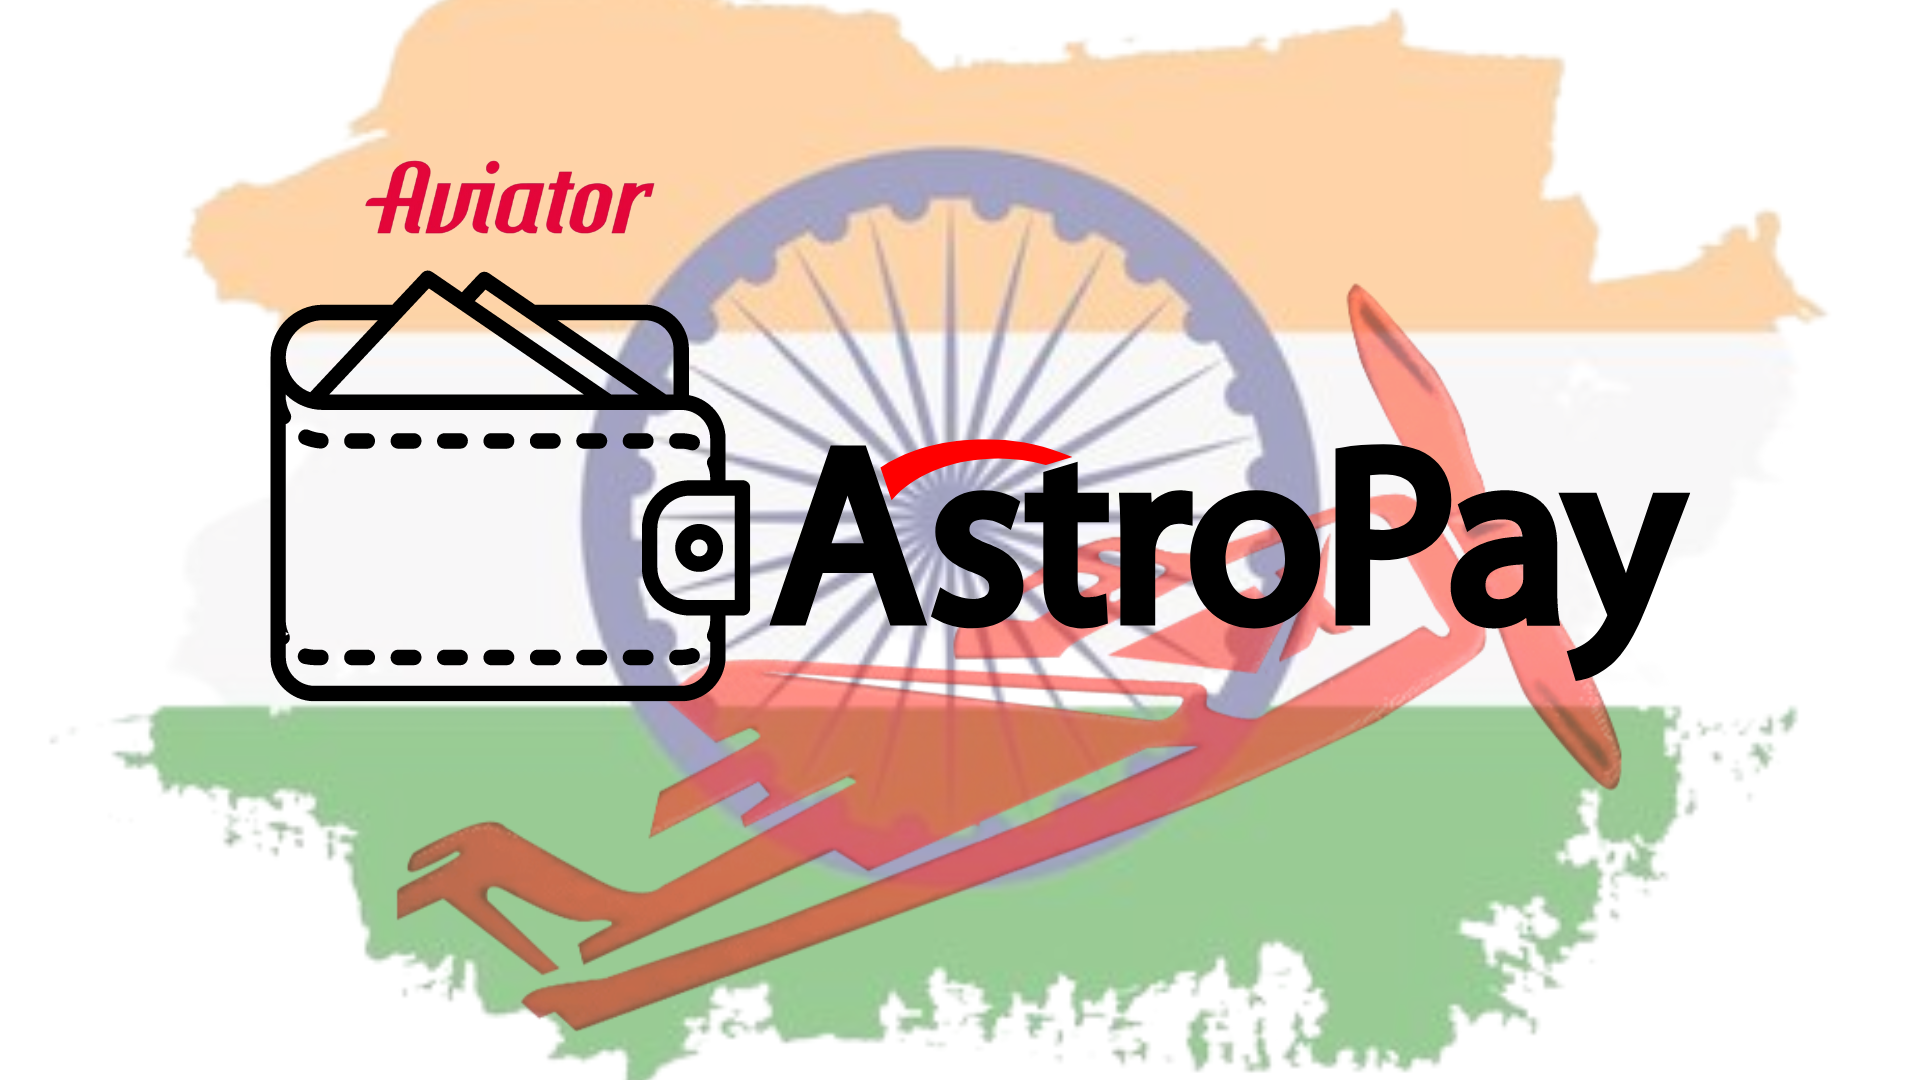 An icon of the wallet with Astropay and Aviator logos, and Indian flag background